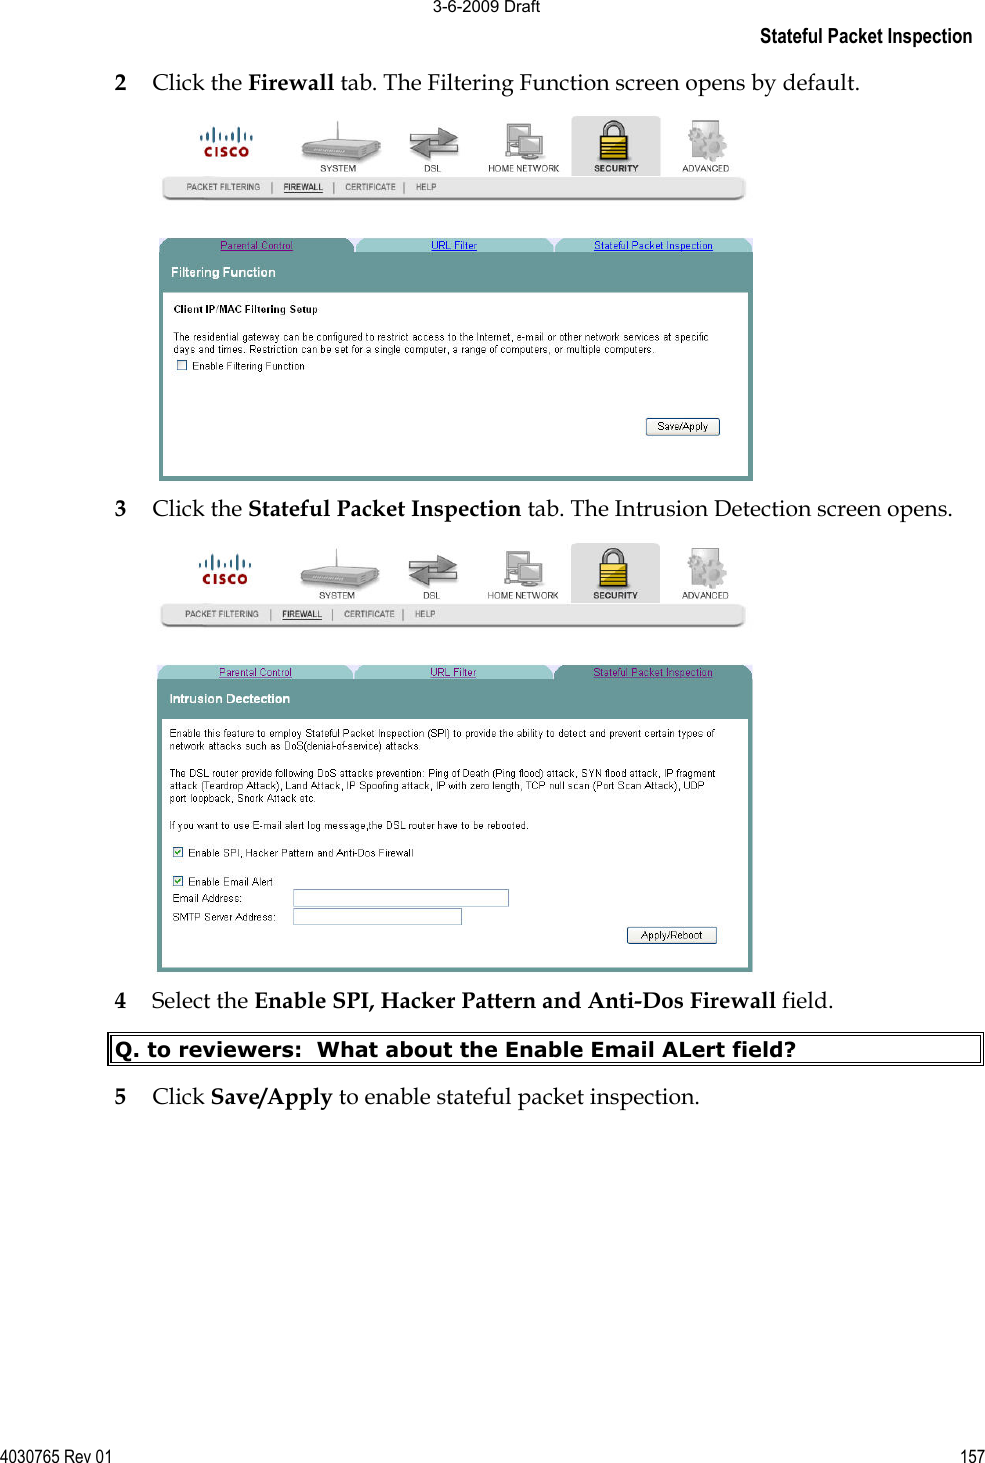 Stateful Packet Inspection 4030765 Rev 01 1572Click the Firewall tab. The Filtering Function screen opens by default. 3Click the Stateful Packet Inspection tab. The Intrusion Detection screen opens. 4Select the Enable SPI, Hacker Pattern and Anti-Dos Firewall field.  Q. to reviewers:  What about the Enable Email ALert field? 5Click Save/Apply to enable stateful packet inspection. 3-6-2009 Draft